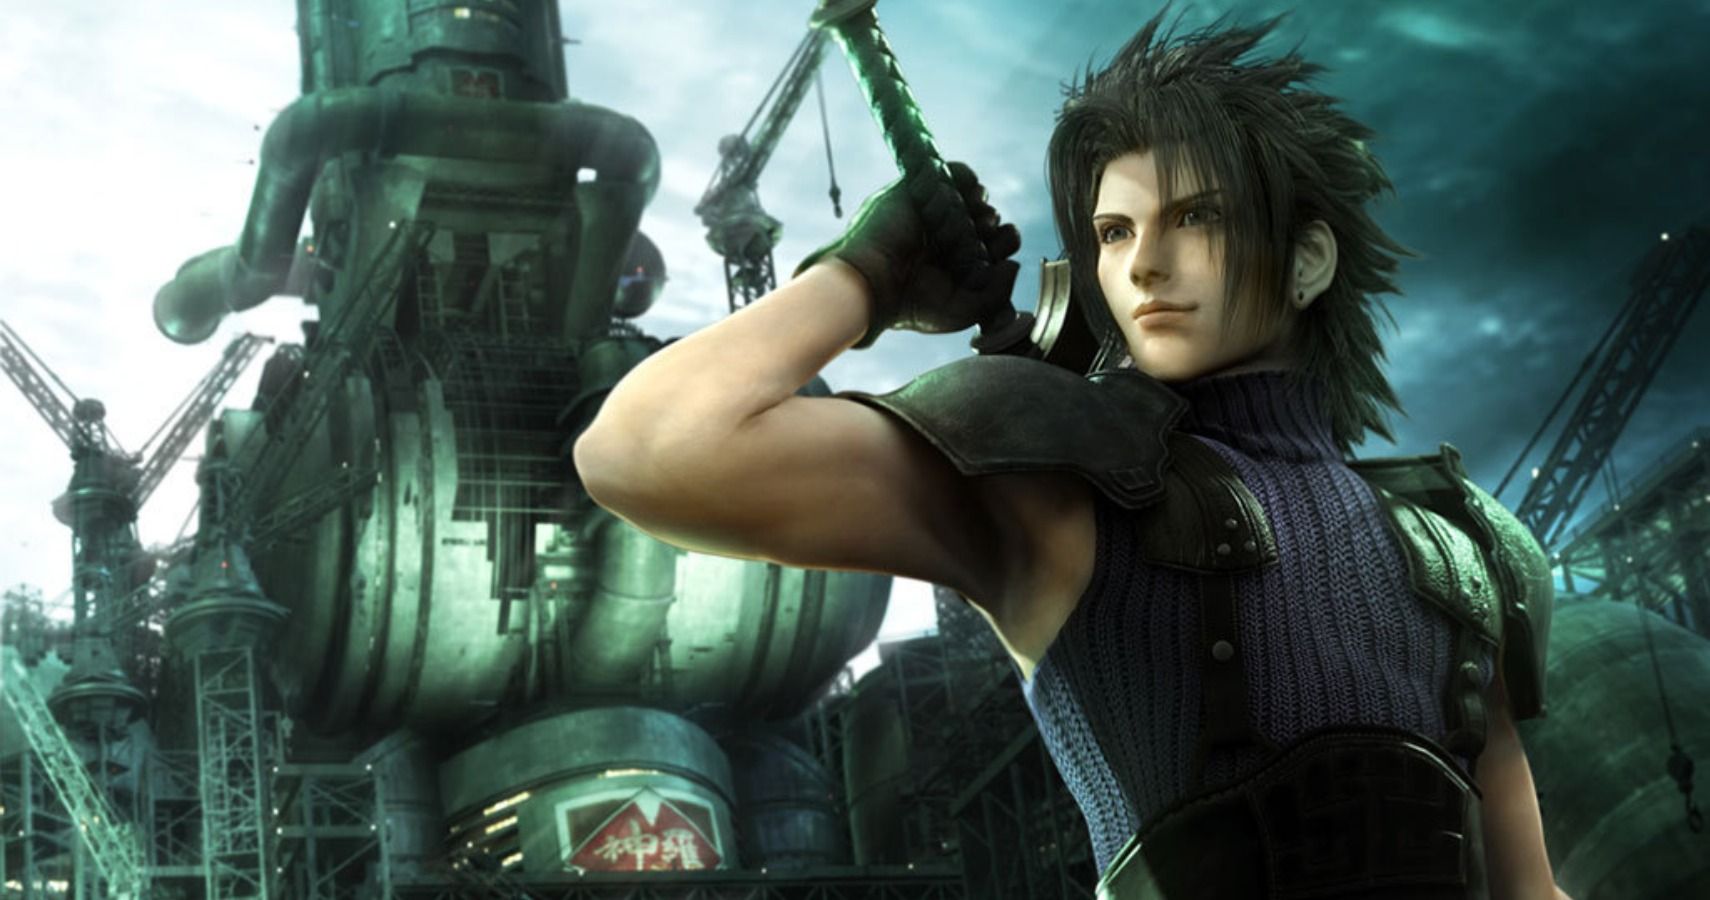 Final Fantasy VII Retrospective Part 2 - Has It Aged Well?